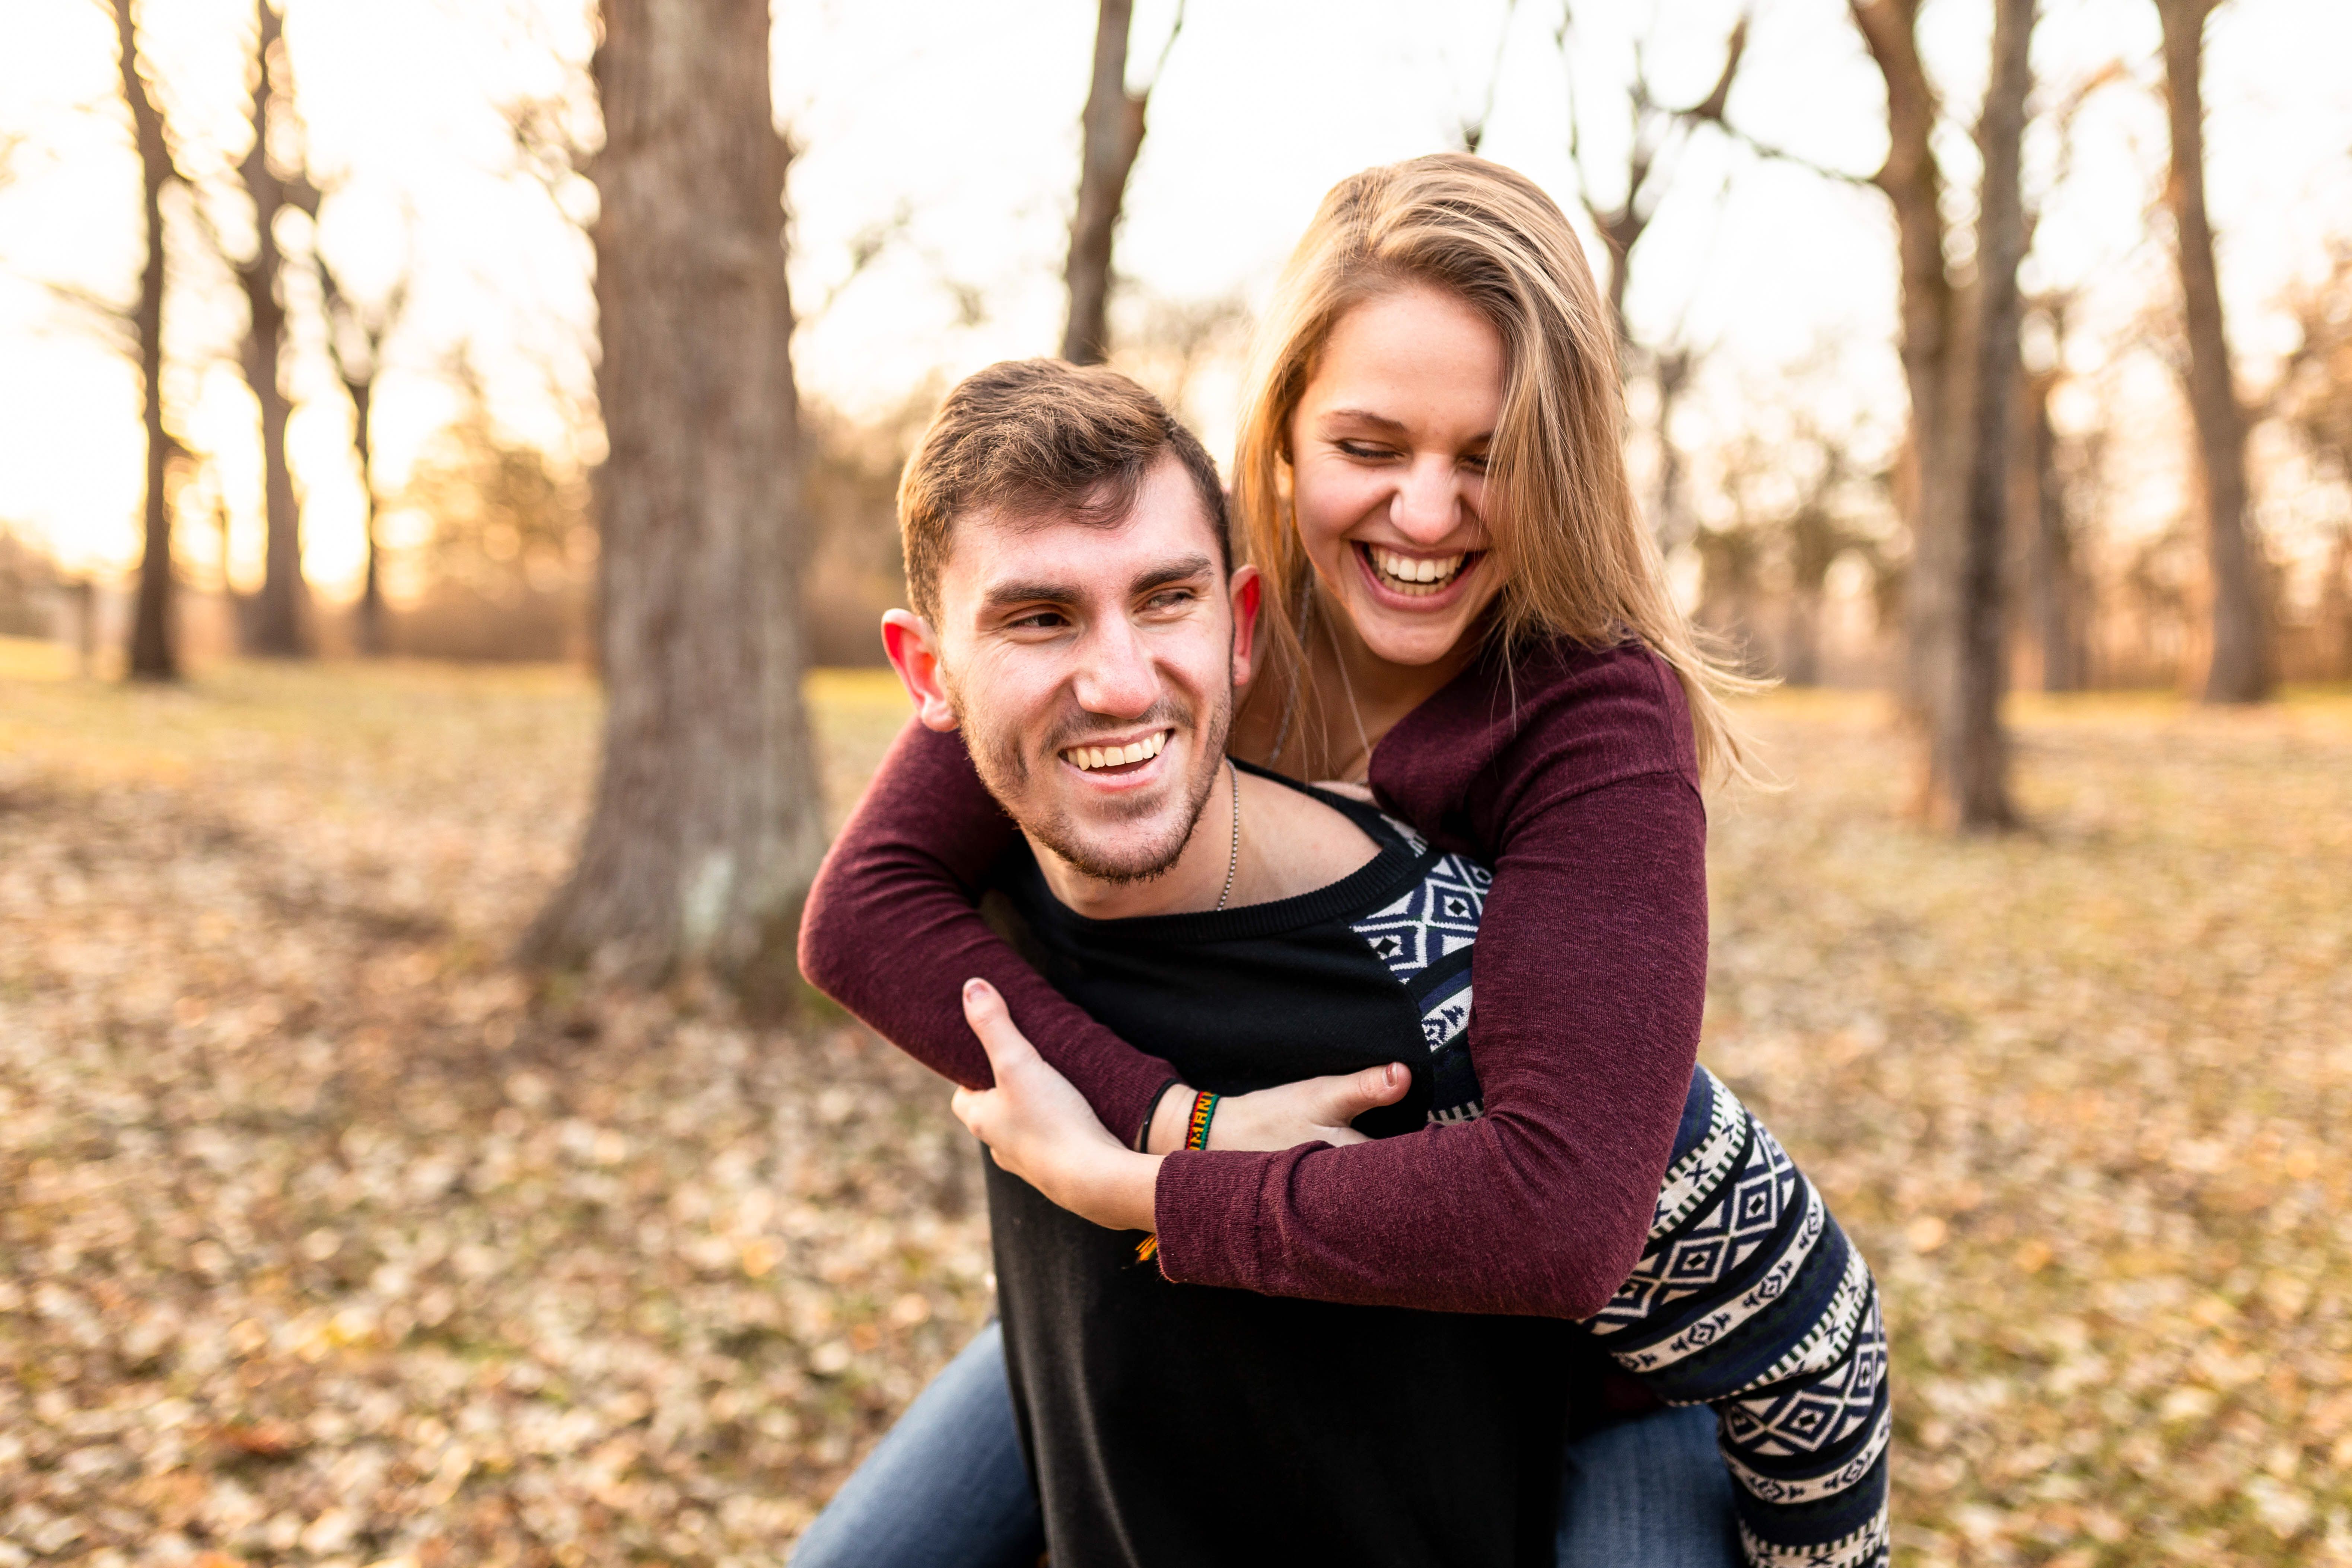 Piggy Back Ride Engagement Pictures Couples Photography Poses Fun